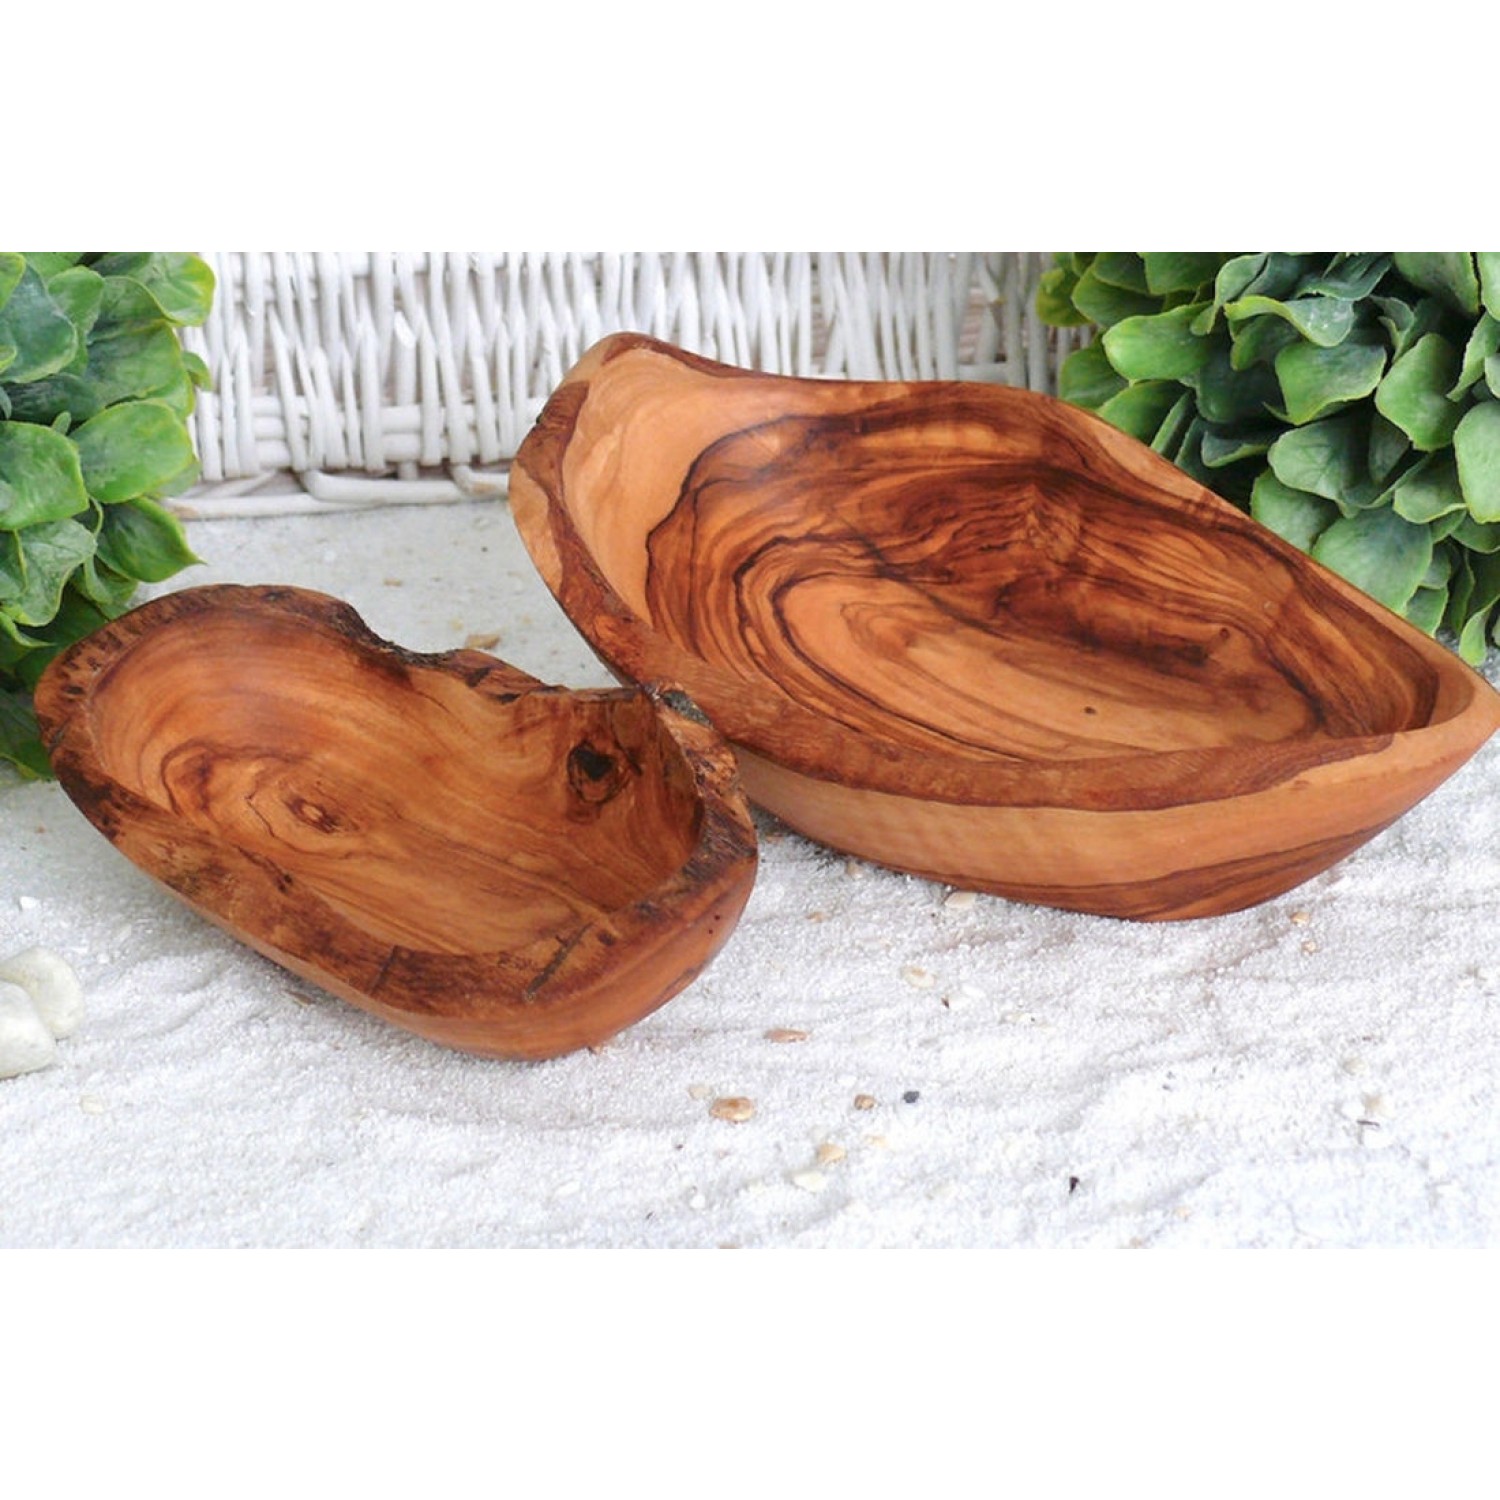 Olive Wood Bowls, rustic, various lengths » D.O.M.